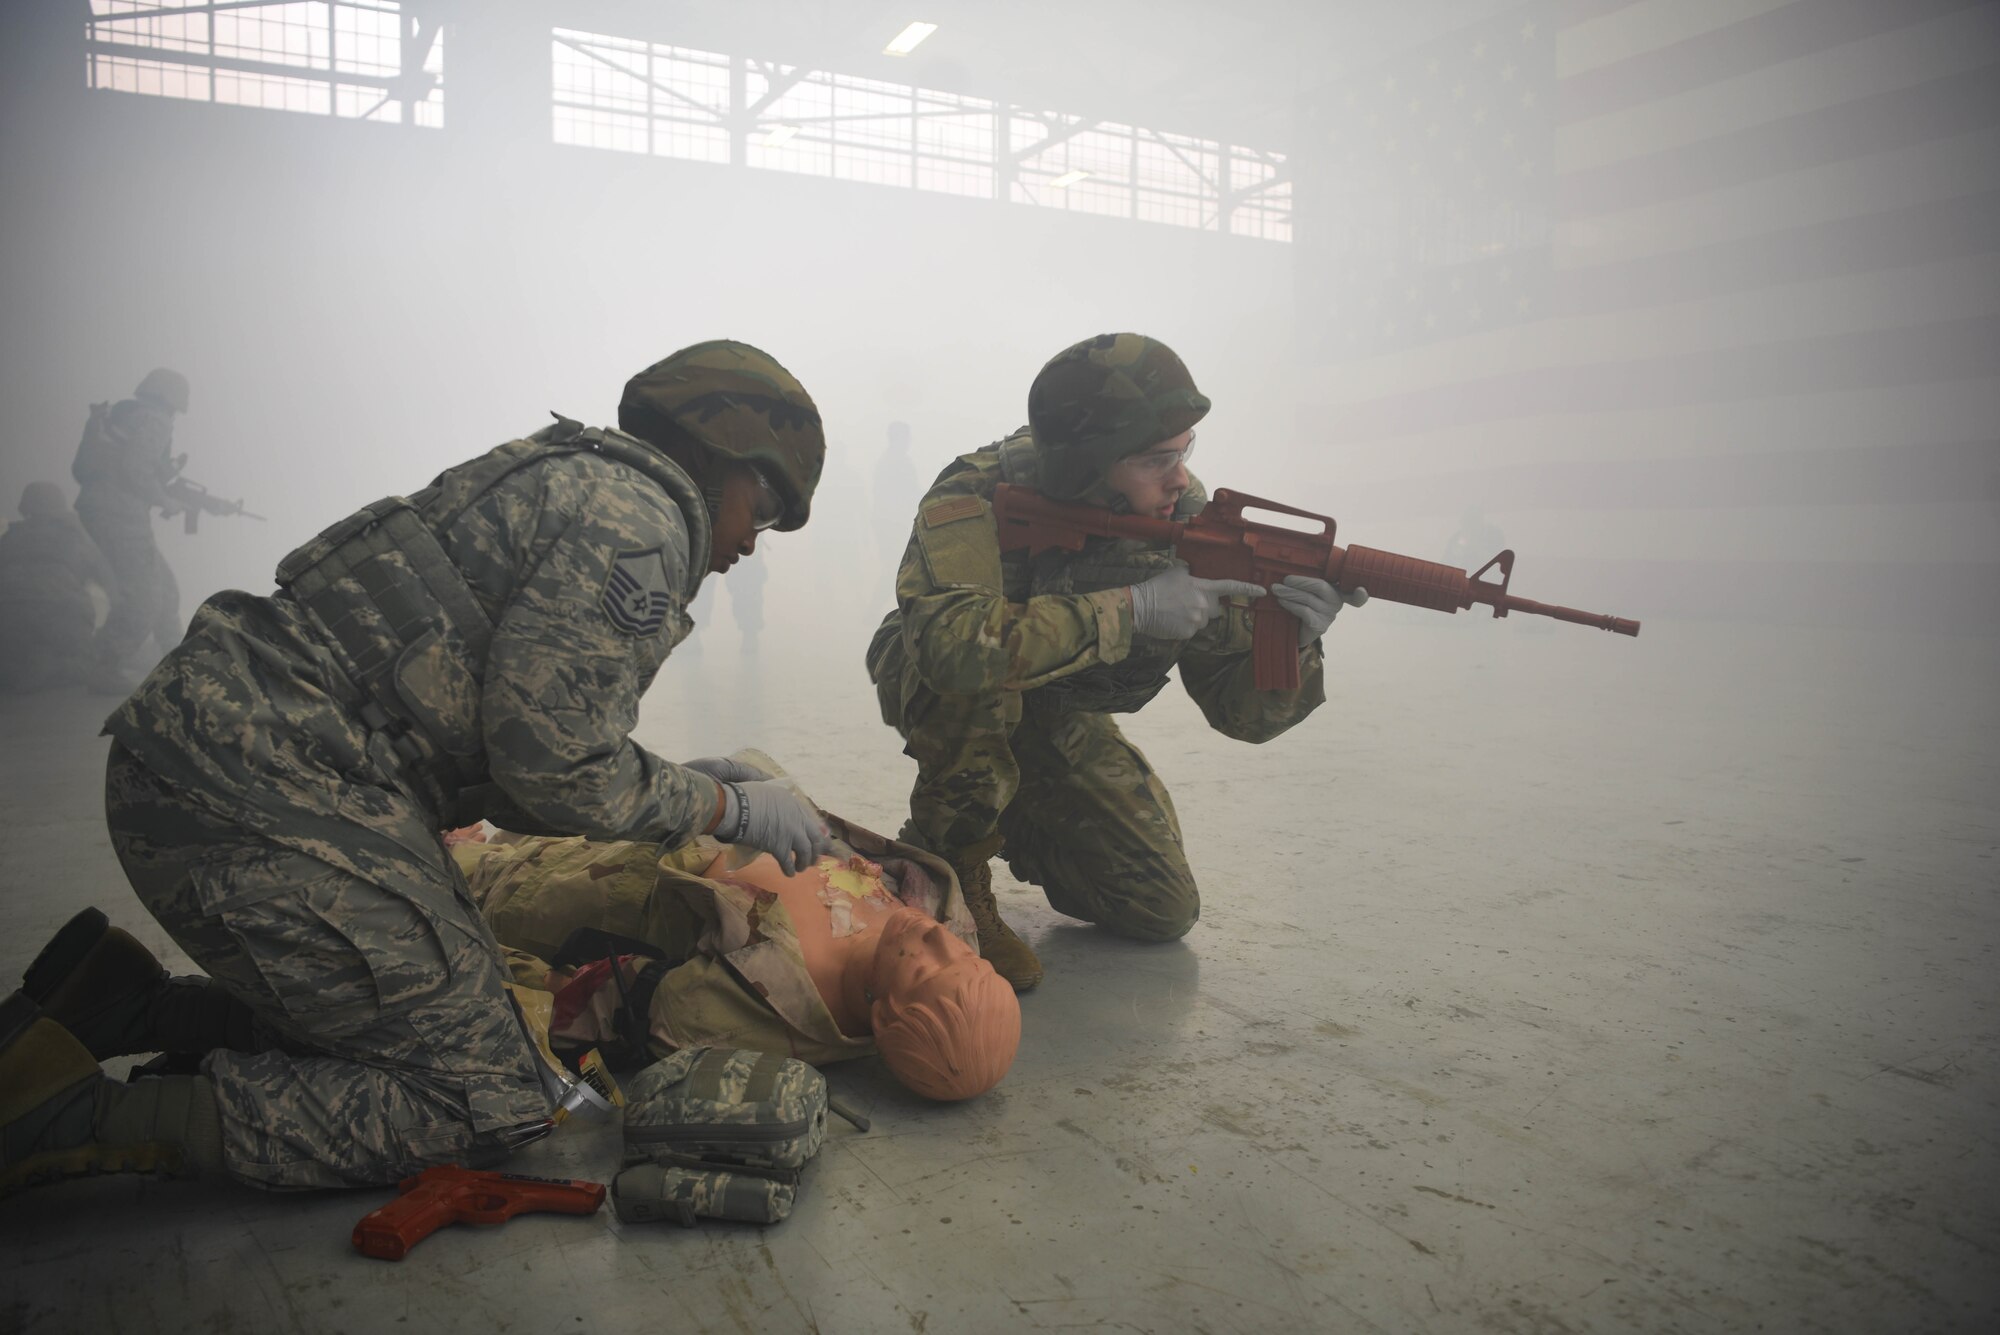 Airmen from the 14th Medical Group train with a medical training mannequin during the Tactical Combat Casualty Care Course in the Walker Center at Columbus Air Force Base, Mississippi, Feb. 23, 2020. TCCC has become the standard of medical training proficiency for military personnel to prepare them for potential combat situations in an ongoing effort to heighten medical readiness. (U.S. Air Force photo by Airman 1st Class Jake Jacobsen)